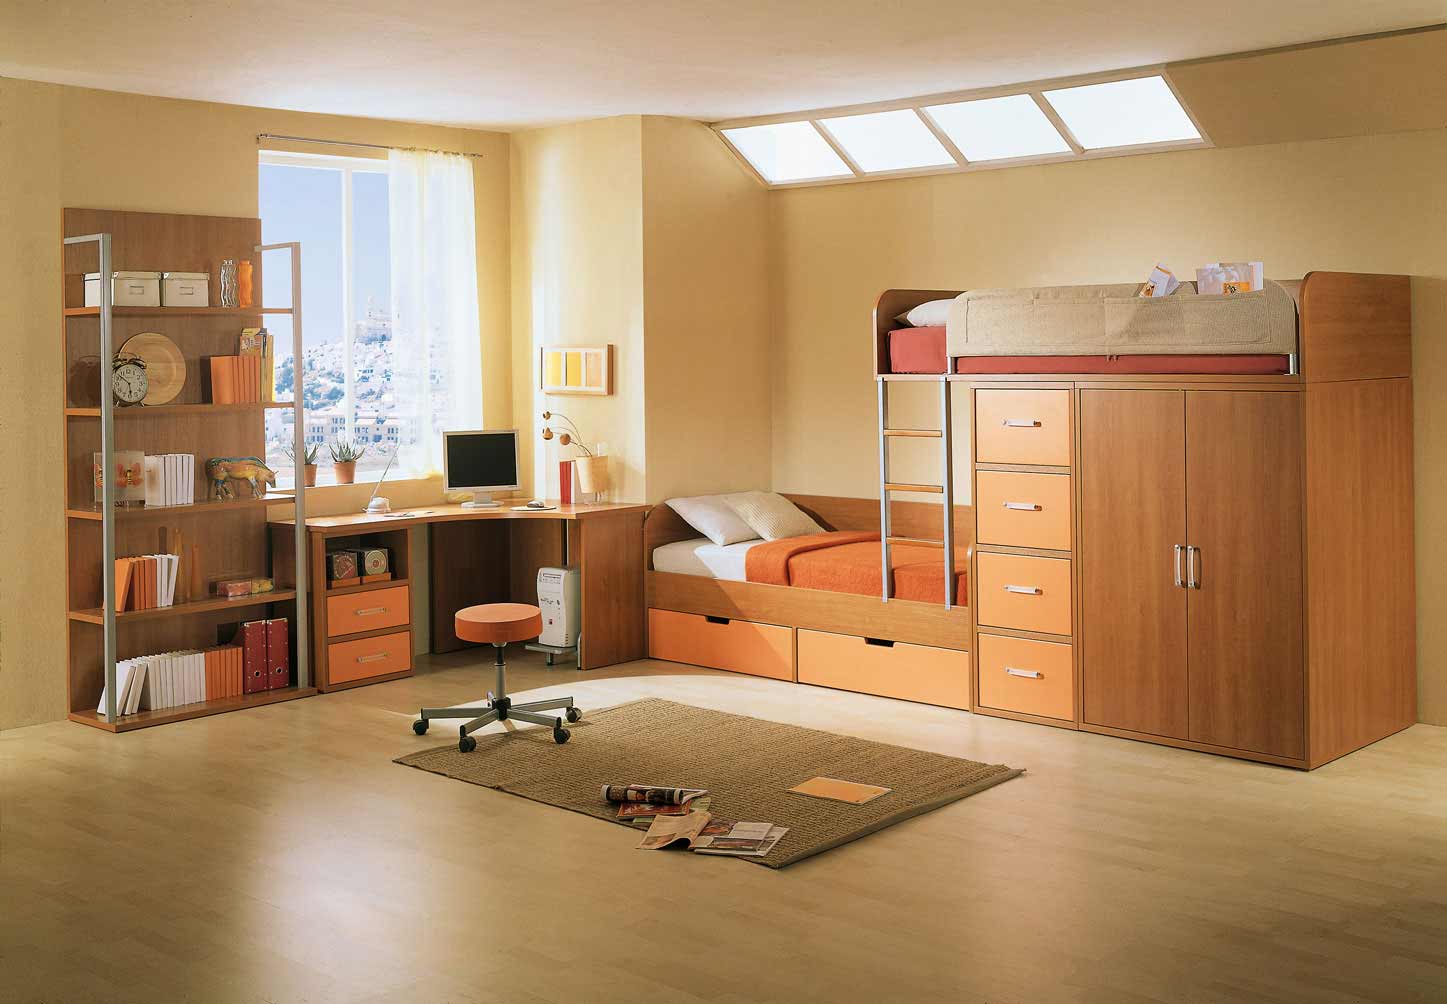 Elegant Kids Kids Awesome Elegant Kids Bedroom With Kids Chat Rooms Completed By Bunk Beds Combined With Cupboards And Furnished With Desk Sets Plus Cabinet Kids Room Design And Furniture Of Kids Chat Rooms